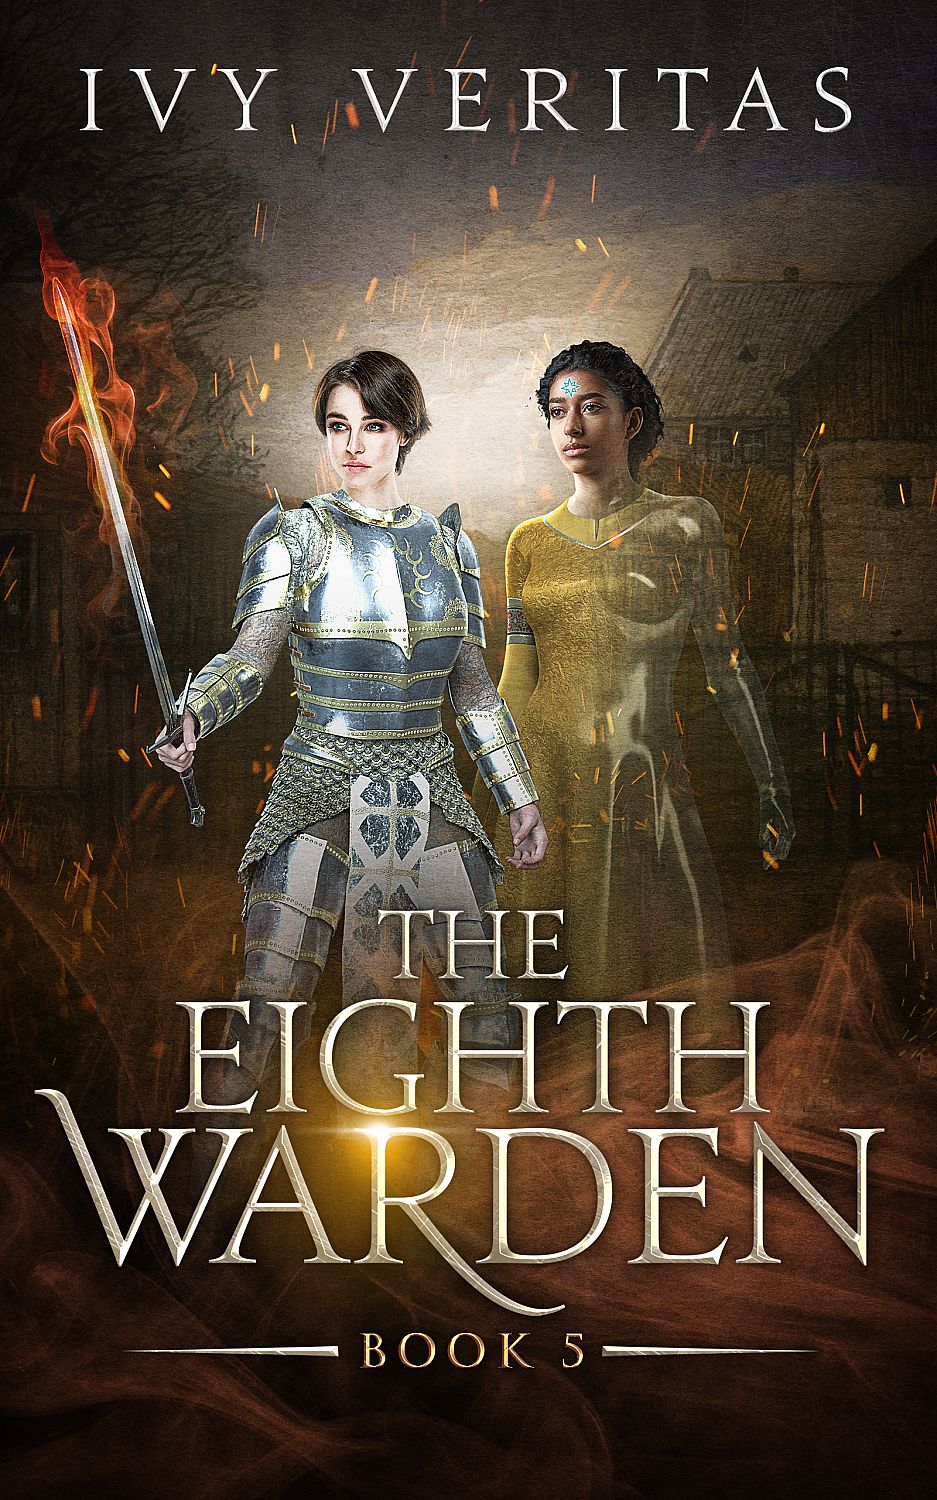 The Eighth Warden Book 5 - Cover